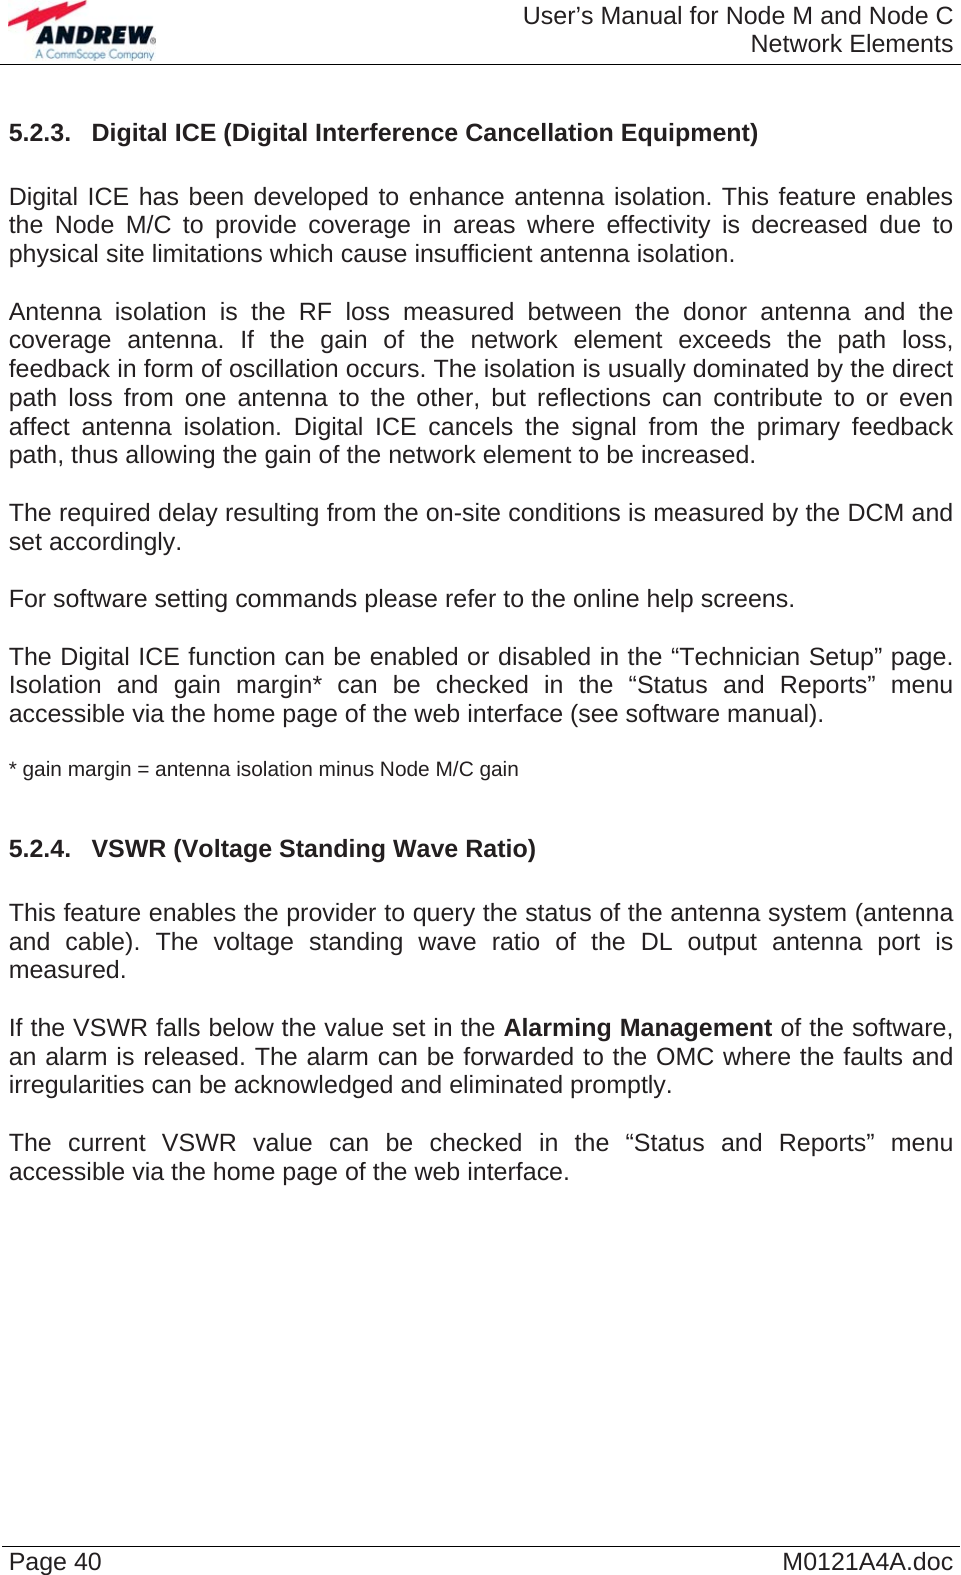  User’s Manual for Node M and Node CNetwork Elements Page 40  M0121A4A.doc 5.2.3.  Digital ICE (Digital Interference Cancellation Equipment)  Digital ICE has been developed to enhance antenna isolation. This feature enables the Node M/C to provide coverage in areas where effectivity is decreased due to physical site limitations which cause insufficient antenna isolation.   Antenna isolation is the RF loss measured between the donor antenna and the coverage antenna. If the gain of the network element exceeds the path loss, feedback in form of oscillation occurs. The isolation is usually dominated by the direct path loss from one antenna to the other, but reflections can contribute to or even affect antenna isolation. Digital ICE cancels the signal from the primary feedback path, thus allowing the gain of the network element to be increased.  The required delay resulting from the on-site conditions is measured by the DCM and set accordingly.  For software setting commands please refer to the online help screens.   The Digital ICE function can be enabled or disabled in the “Technician Setup” page. Isolation and gain margin* can be checked in the “Status and Reports” menu accessible via the home page of the web interface (see software manual).  * gain margin = antenna isolation minus Node M/C gain  5.2.4.  VSWR (Voltage Standing Wave Ratio)  This feature enables the provider to query the status of the antenna system (antenna and cable). The voltage standing wave ratio of the DL output antenna port is measured.  If the VSWR falls below the value set in the Alarming Management of the software, an alarm is released. The alarm can be forwarded to the OMC where the faults and irregularities can be acknowledged and eliminated promptly.  The current VSWR value can be checked in the “Status and Reports” menu accessible via the home page of the web interface.  